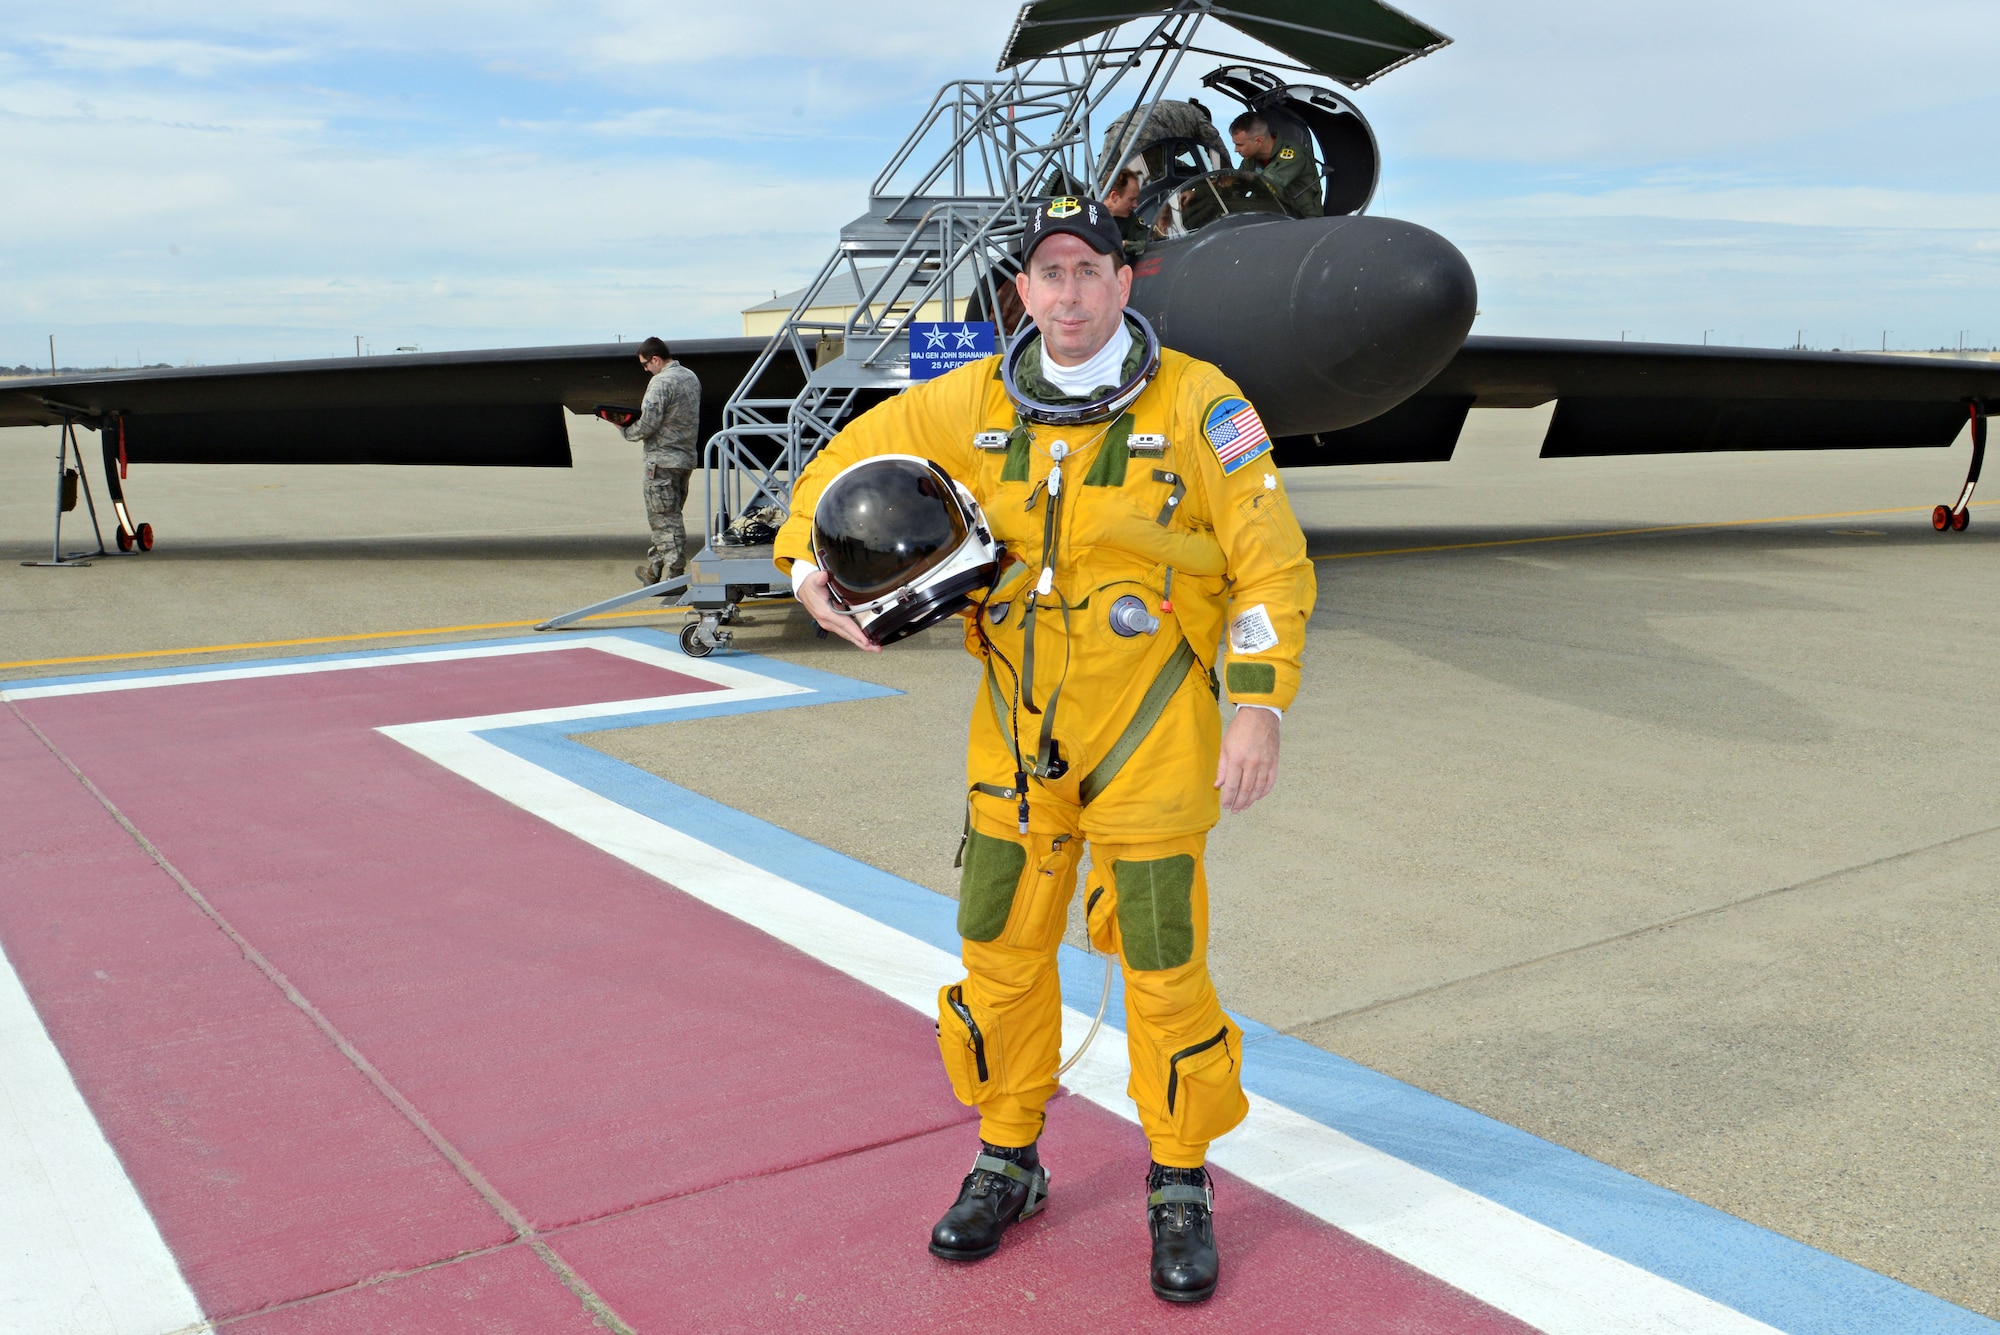 Maj. Gen. John Shanahan, 25th Air Force commander, poses in front of a U-2 Dragon Lady after receiving a flight at Beale Air Force Base, Calif., Oct. 17, 2014. Shanahan and Chief Master Sgt. Roger Towberman, 25th AF command chief, visited Beale for the first time since the Sept. 29 re-alignment of the 9th Reconnaissance Wing to the 25th AF.  (U.S Air Force photo by John Schwab/Released)